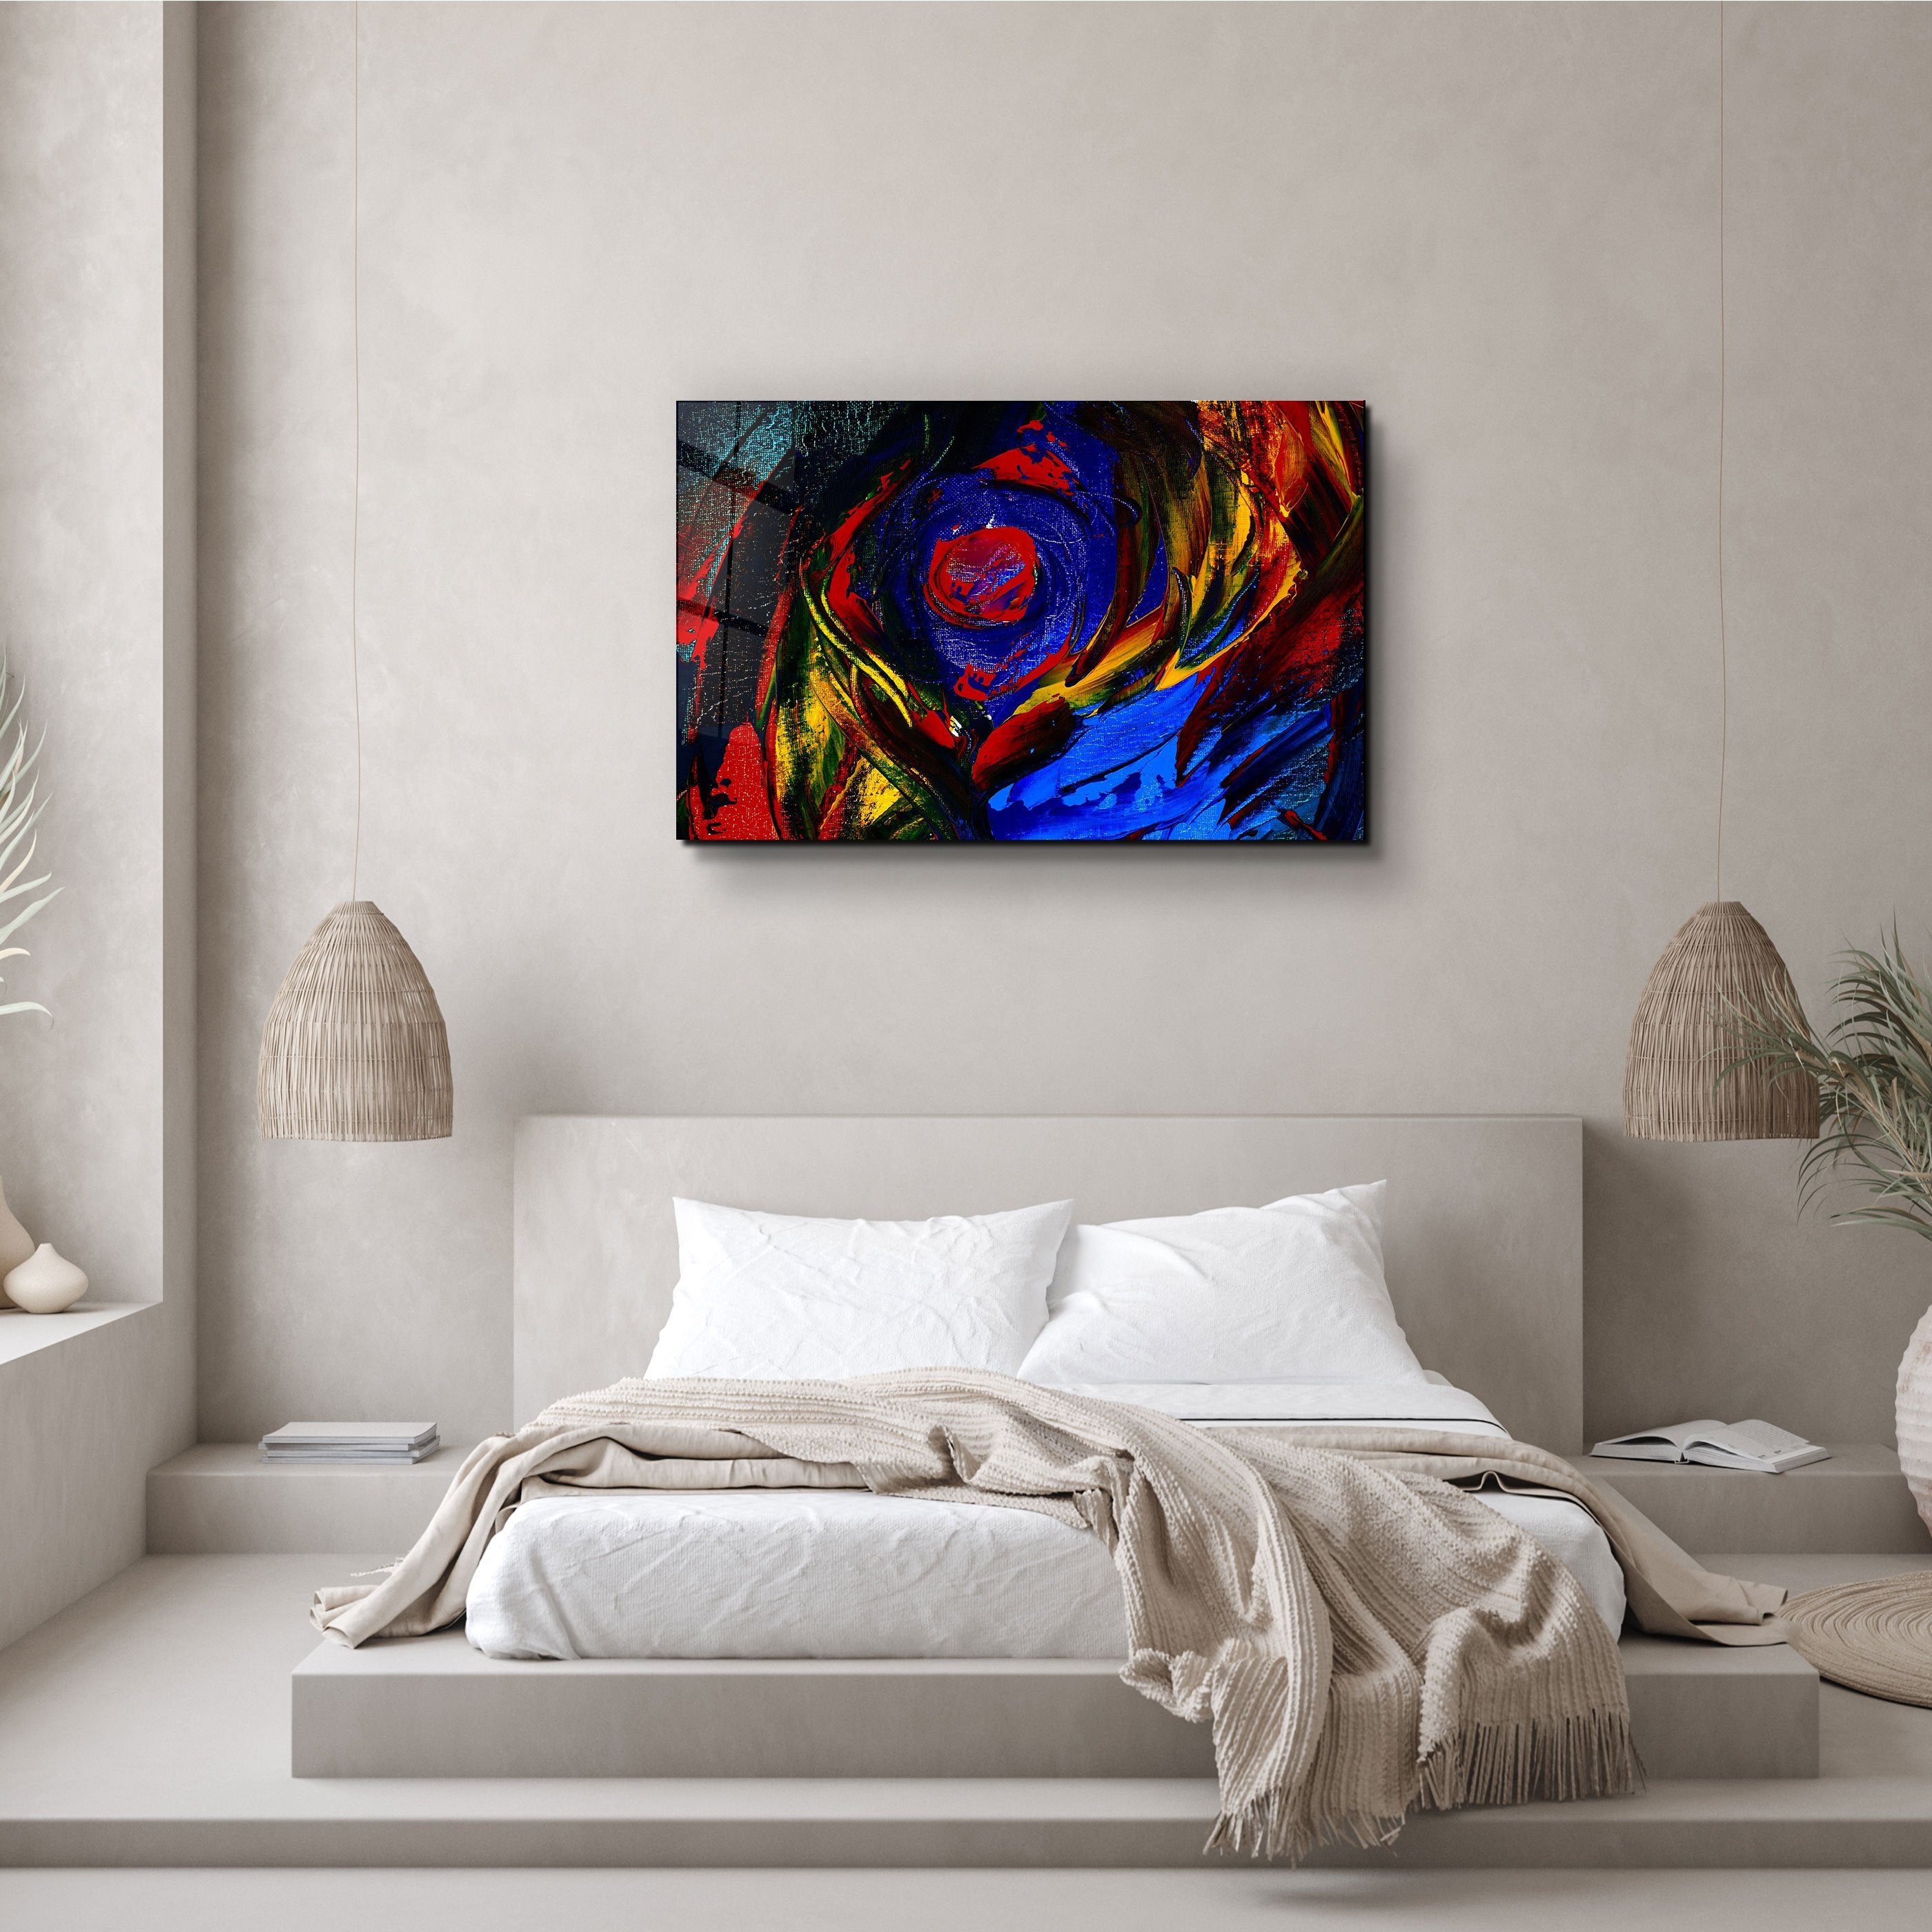 ・"Abstract Colorful Shapes"・Glass Wall Art